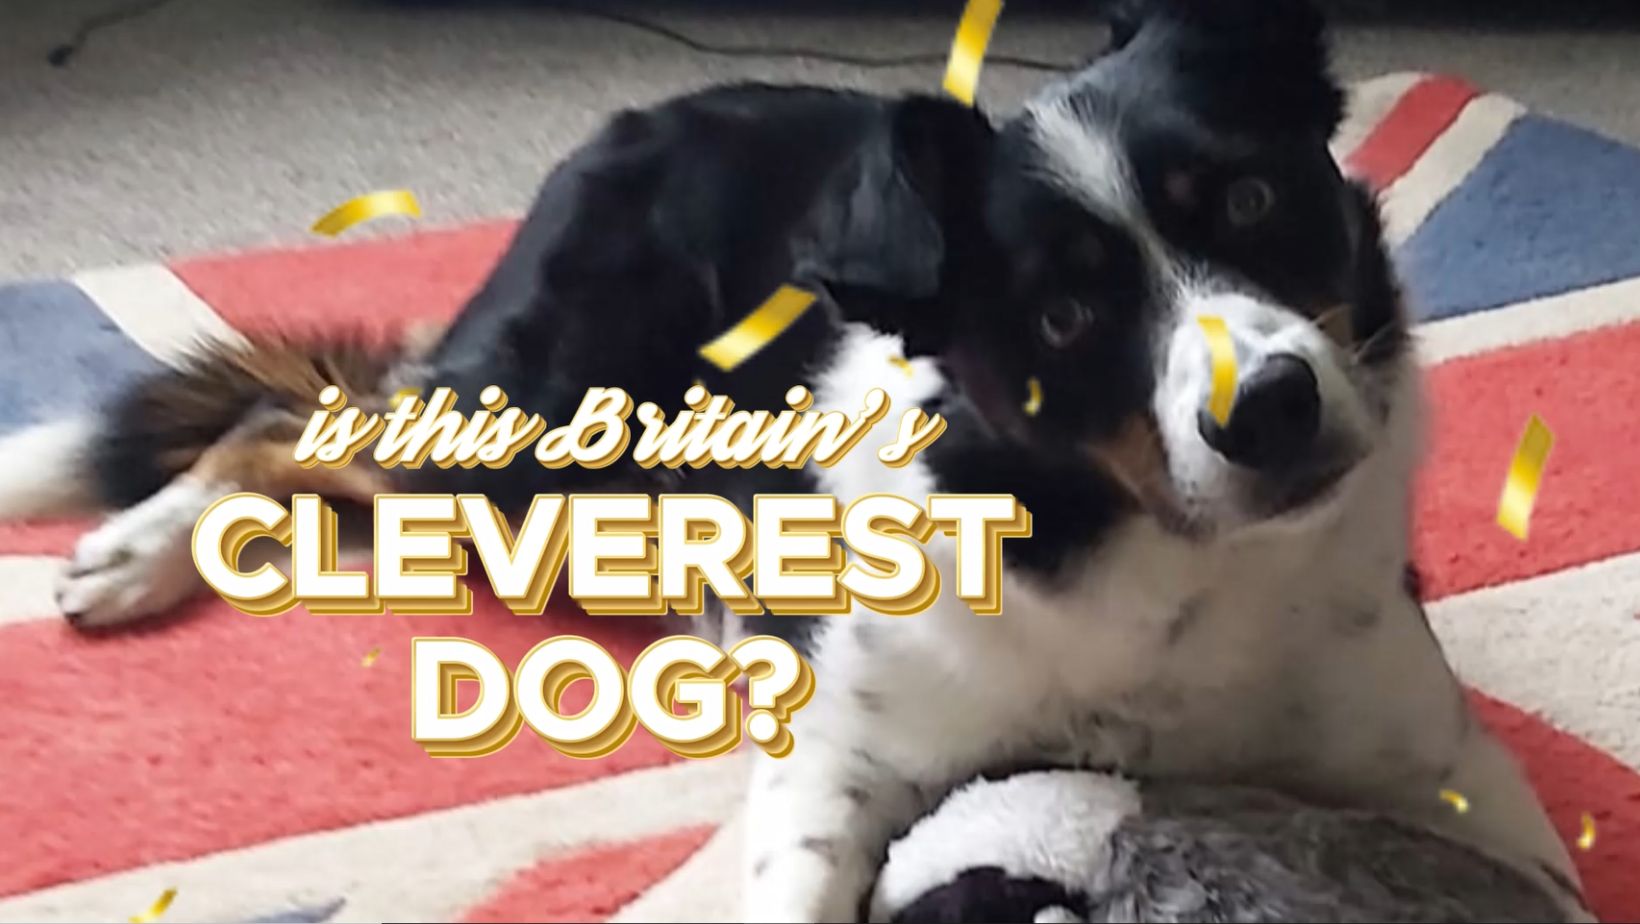 Adorable video shows 'Britain's smartest dog' identify his toys by name